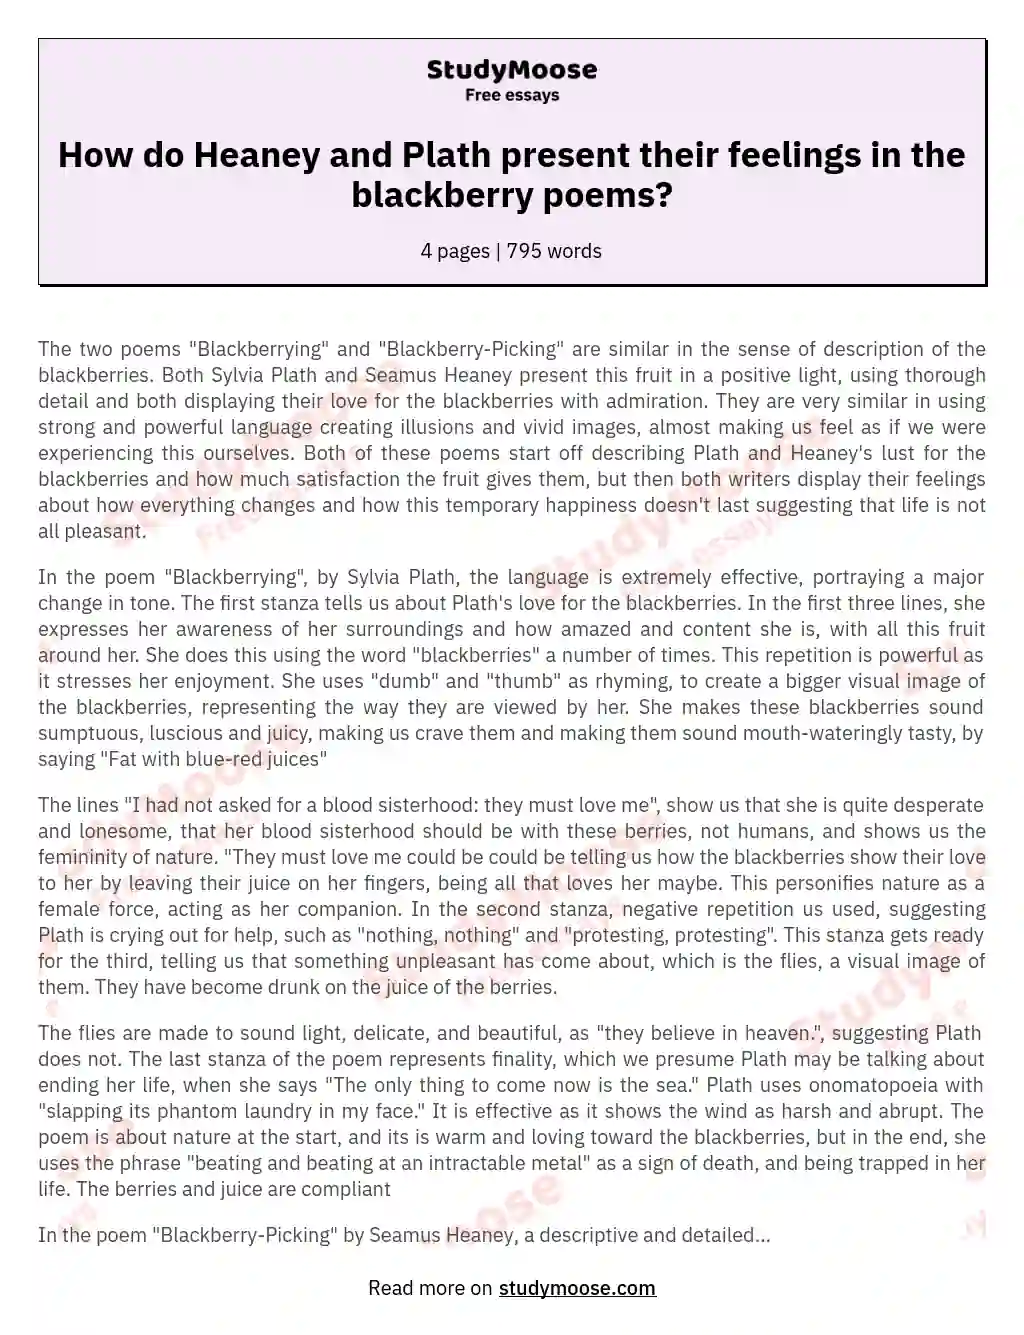 How do Heaney and Plath present their feelings in the blackberry poems?